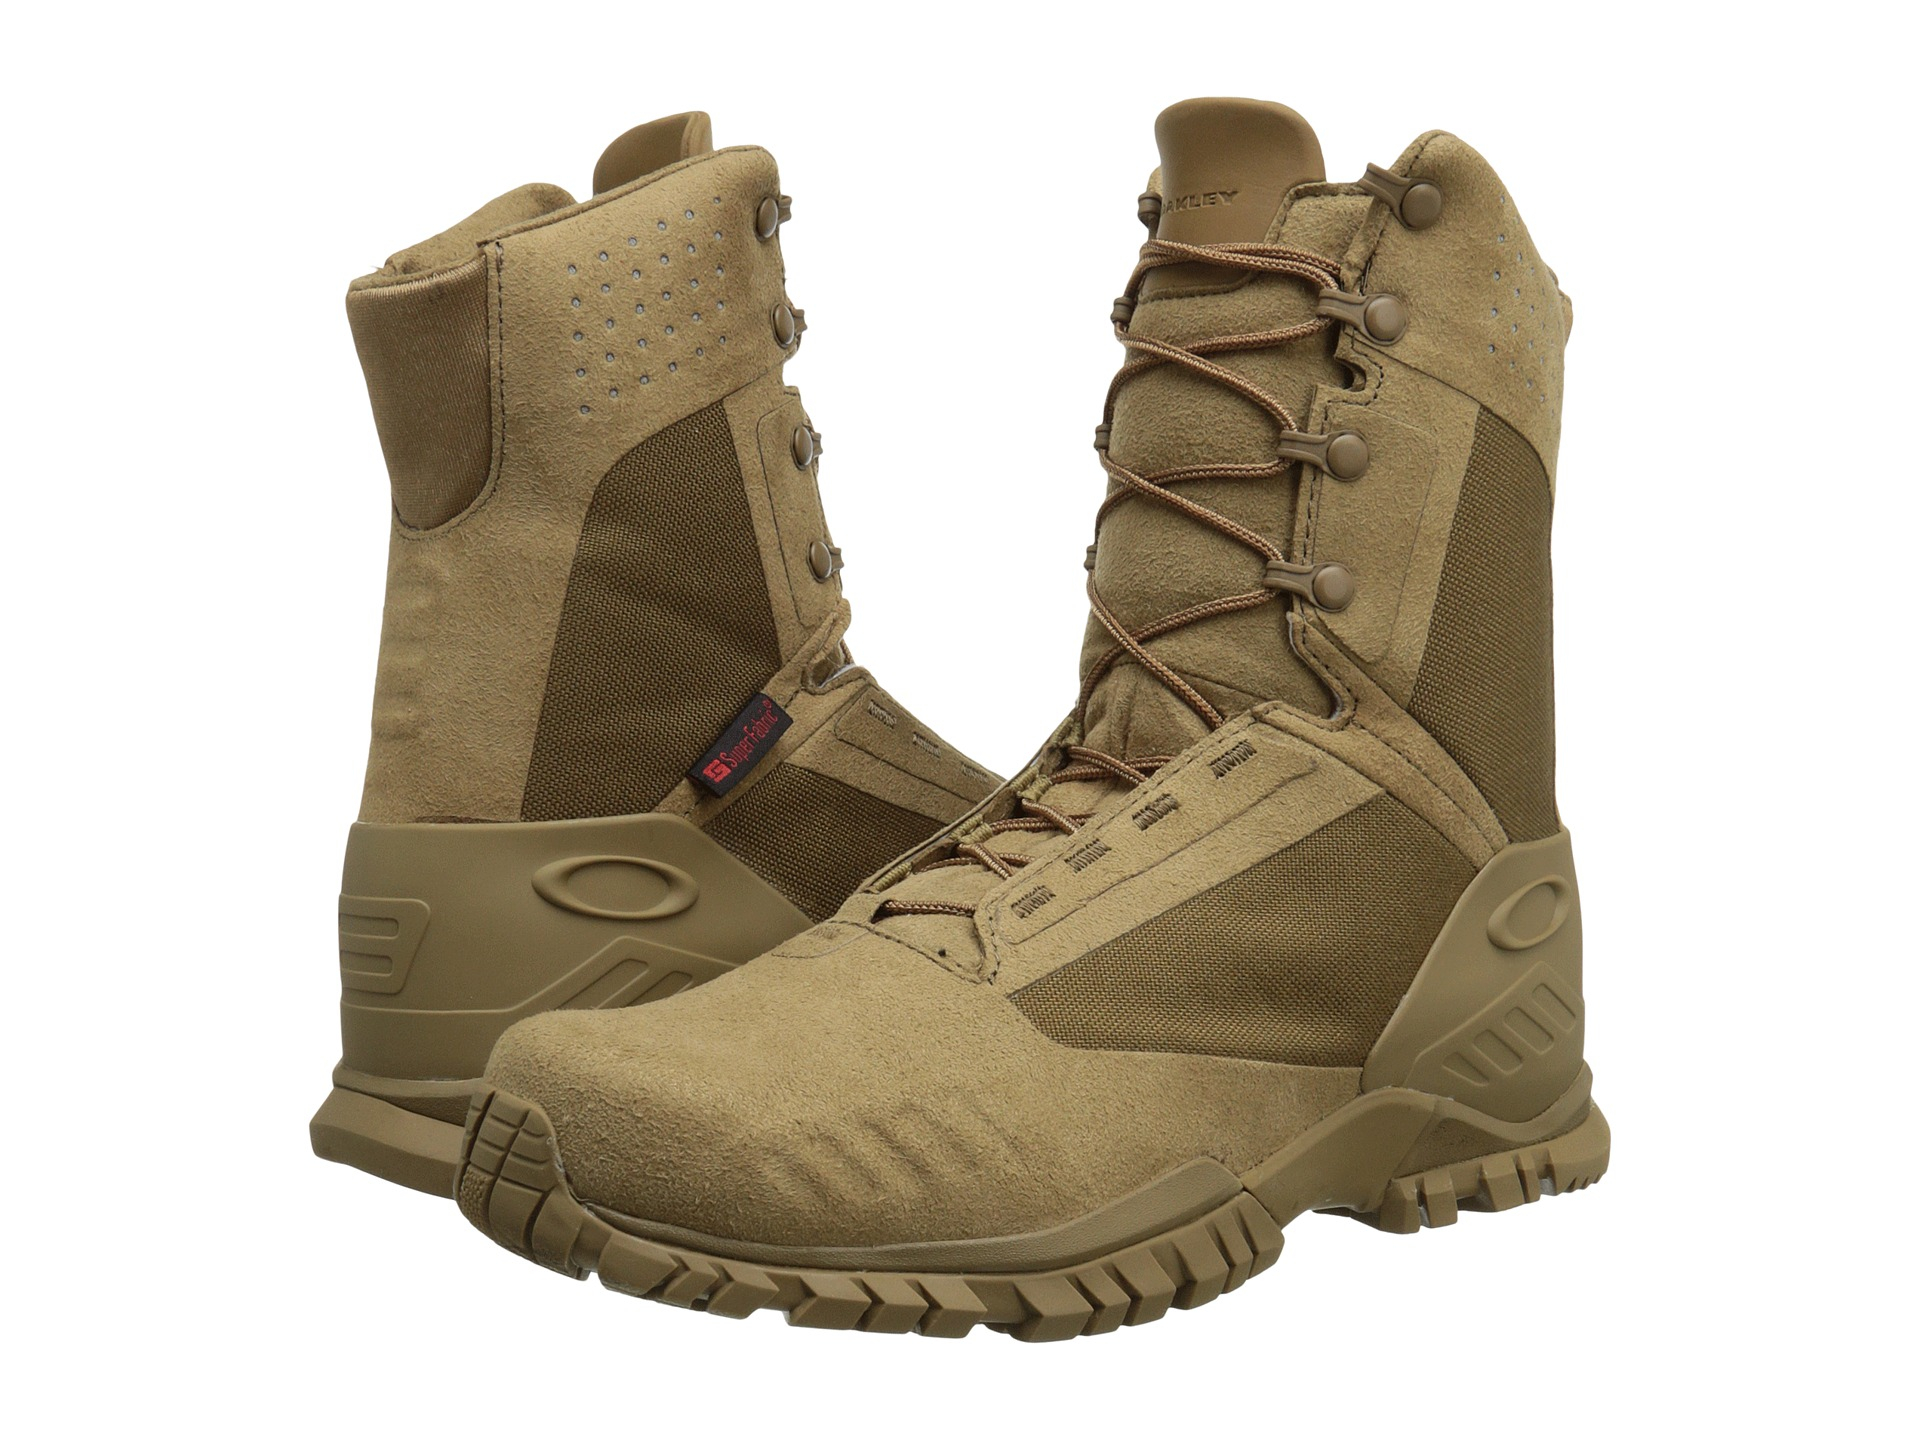 Oakley Military Boots